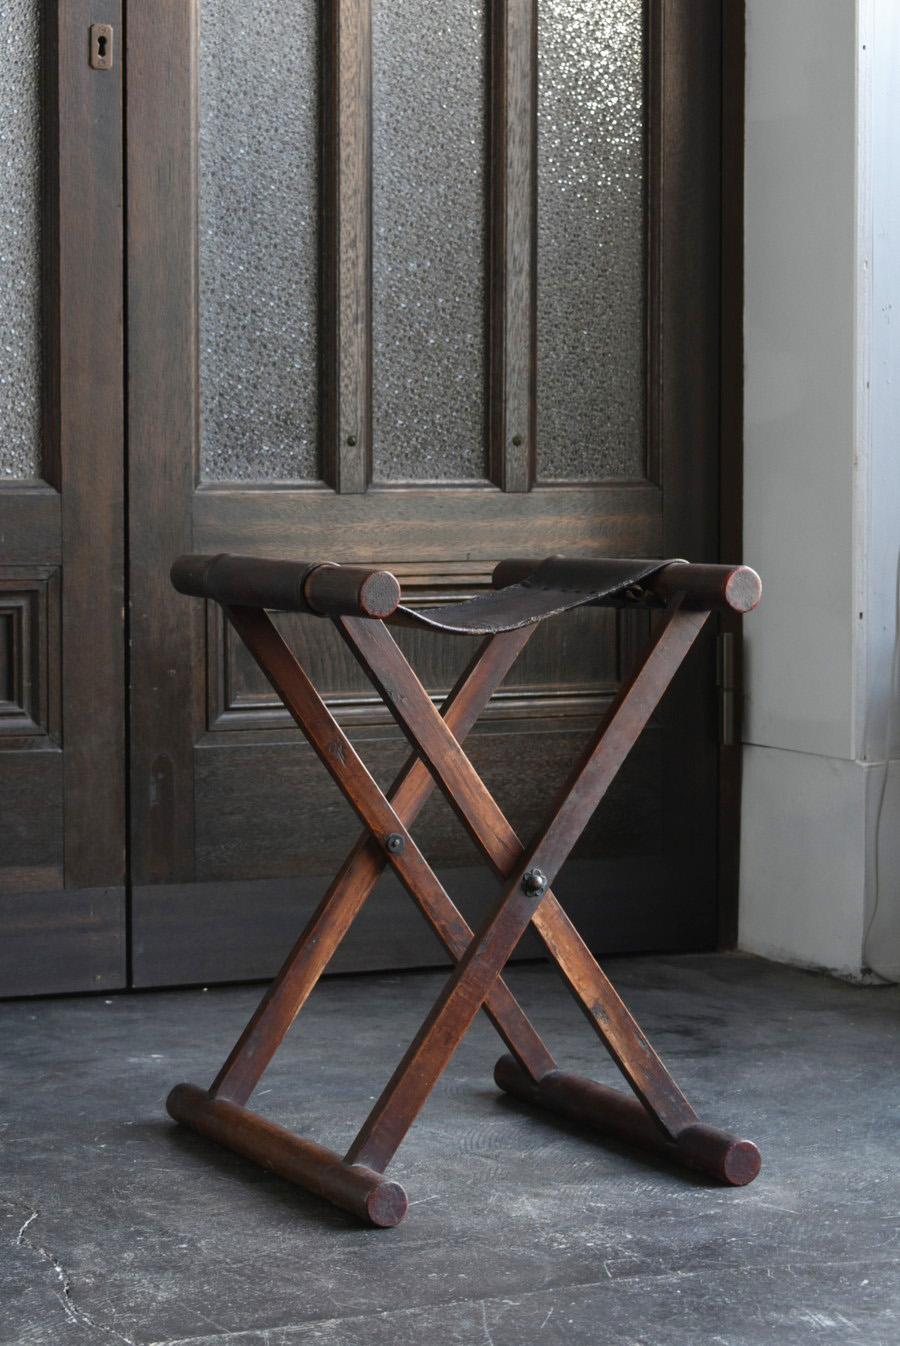 I would like to introduce an old Japanese chair. This is a small folding chair called 